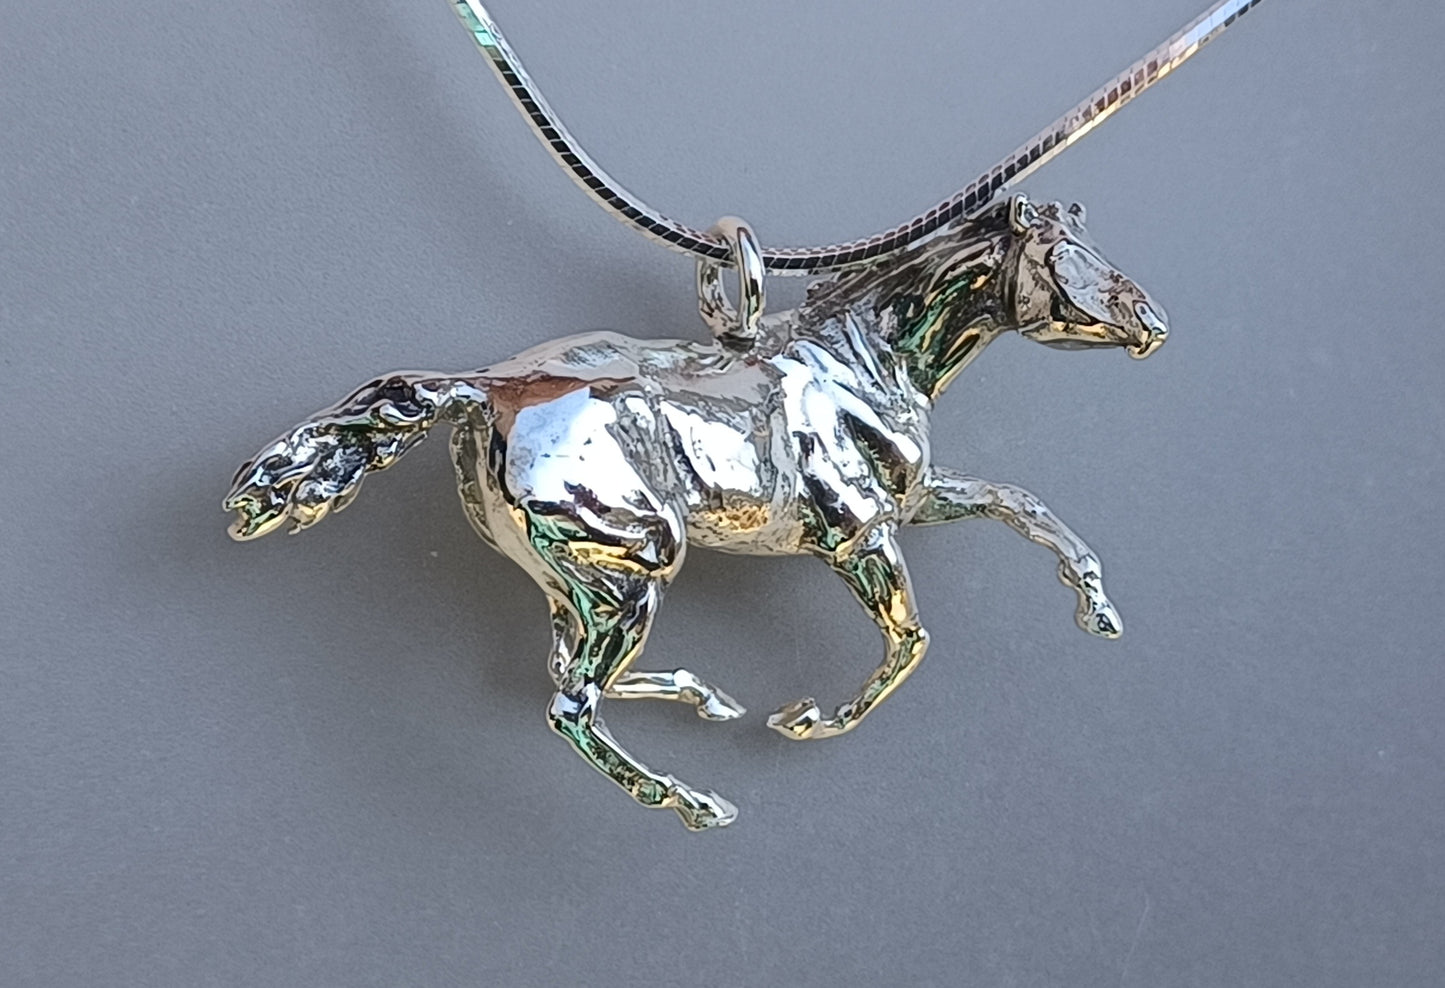 Equestrian Jewelry Galloping Horse Sterling Silver Necklace Pendant and Chain. Miniature Scultpure